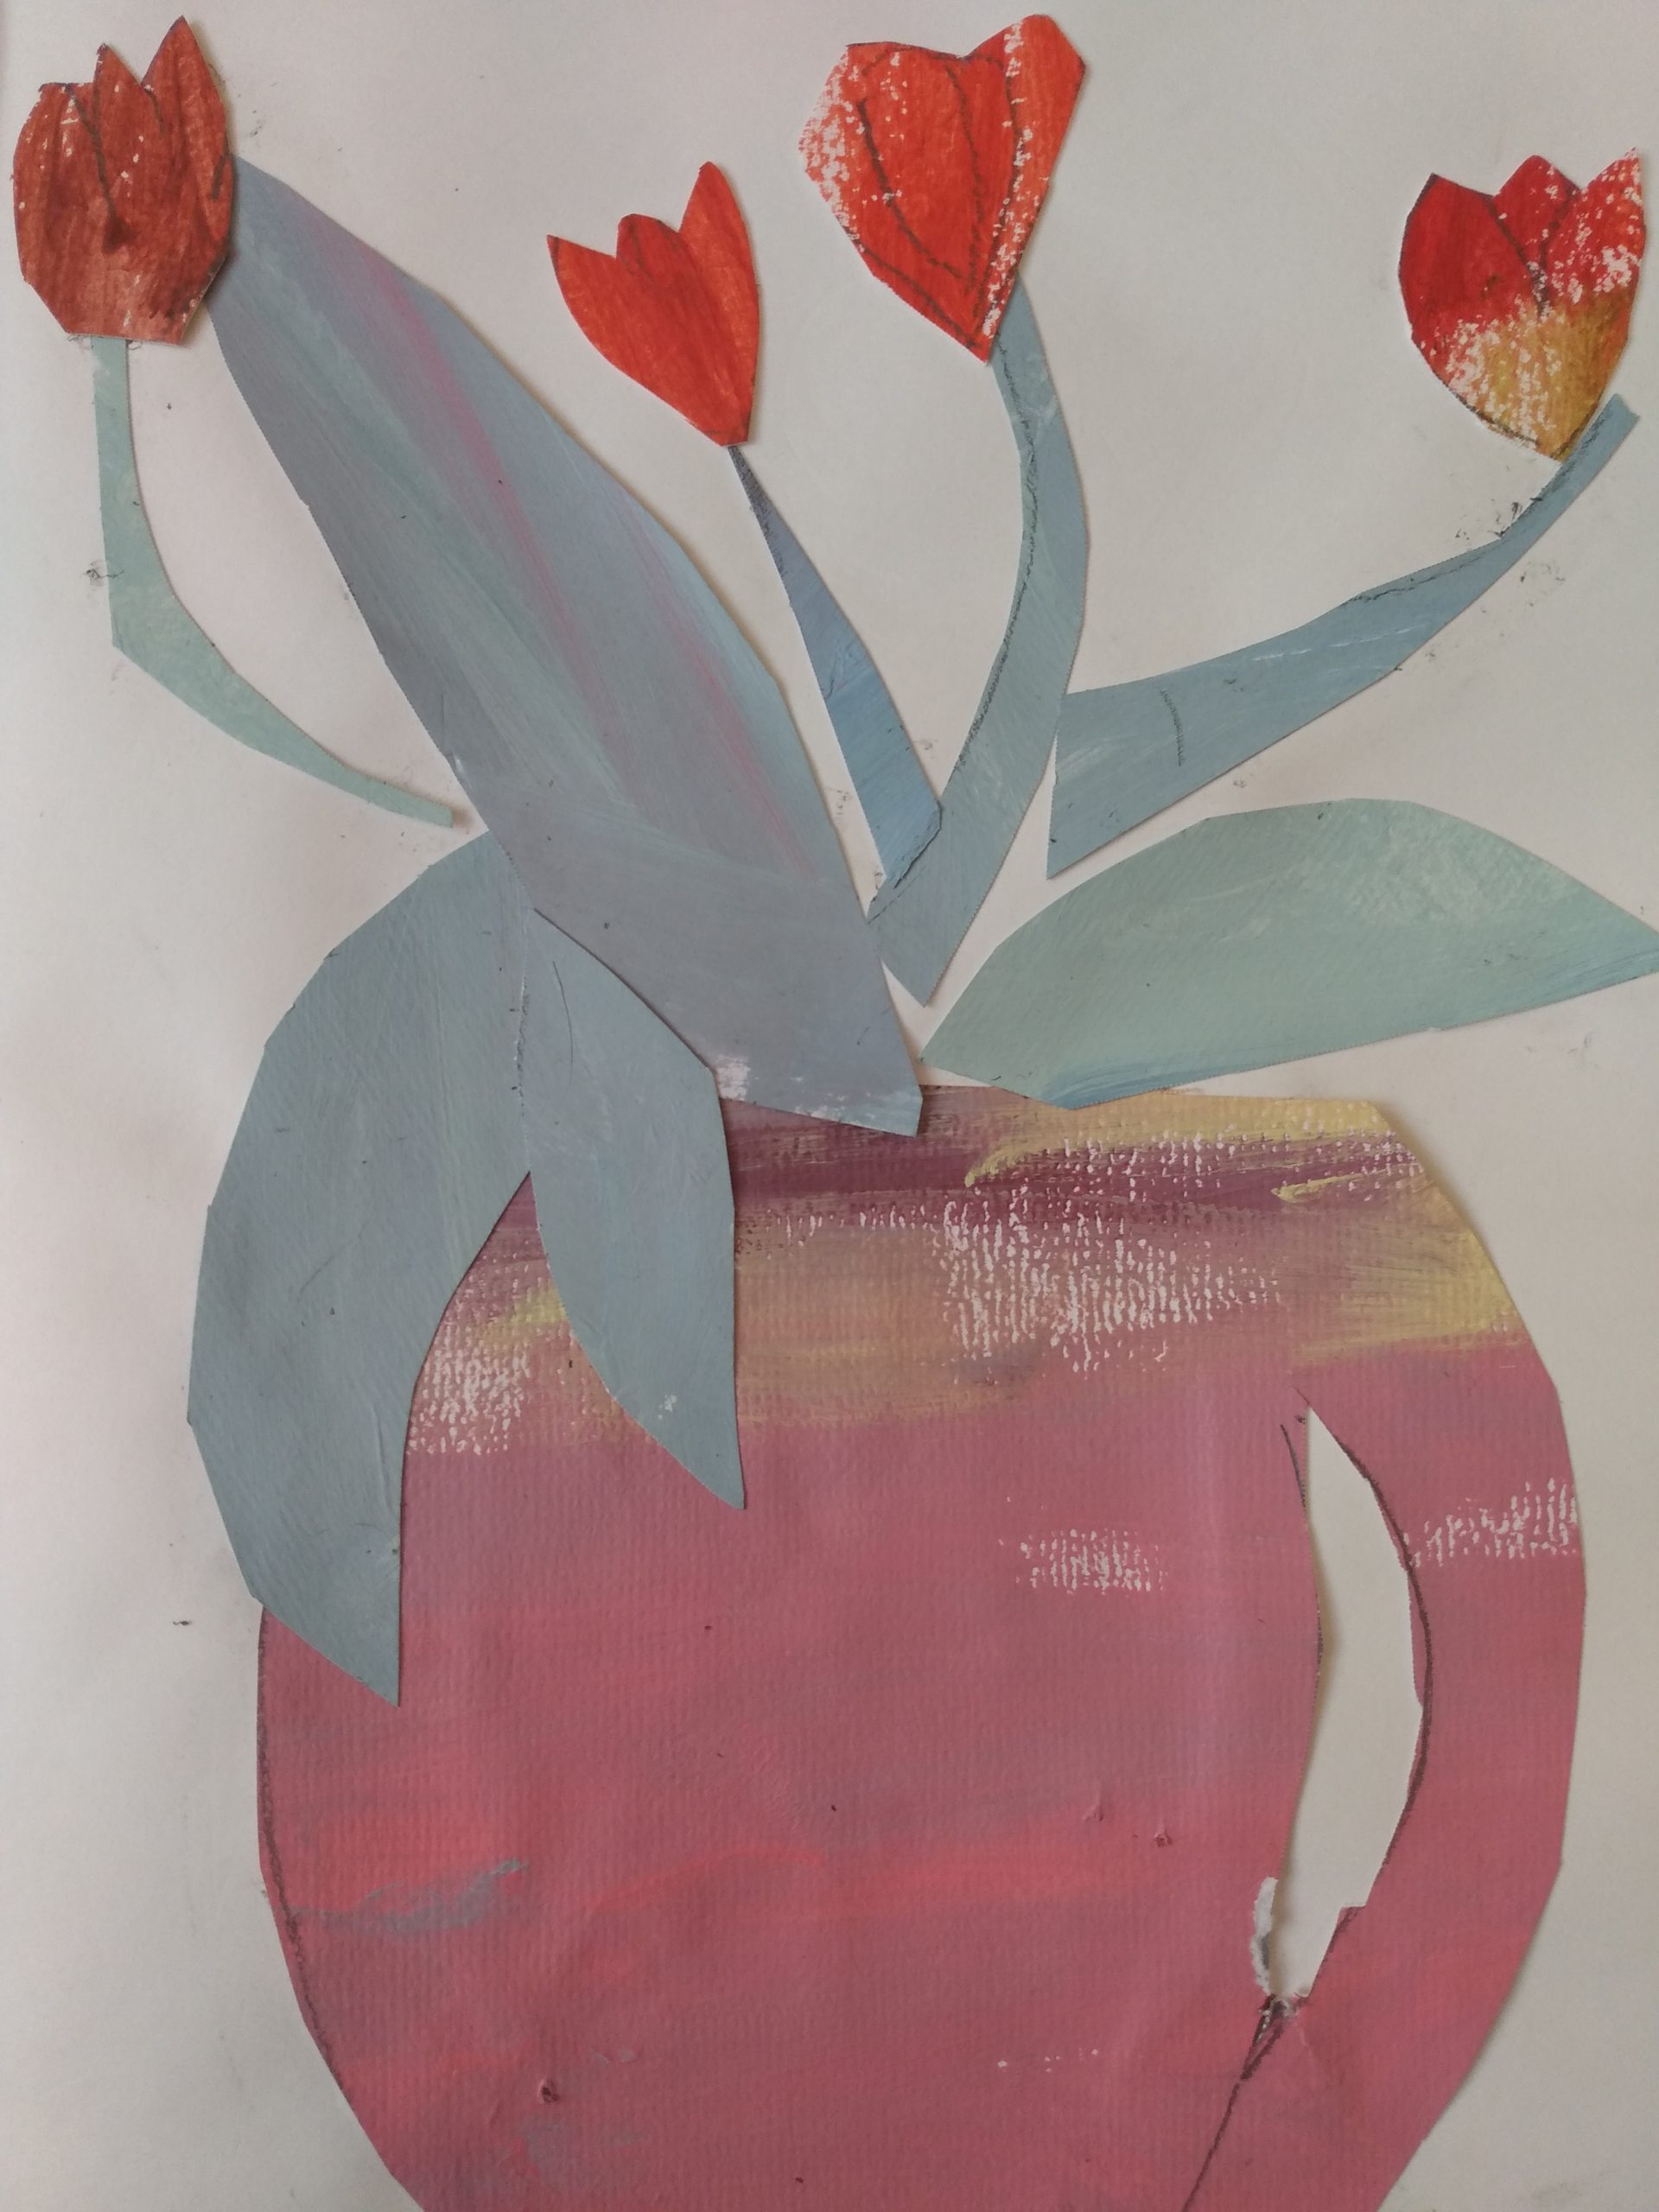 A textile portrait of four red tulips with thick blue-grey leaves and stalks, sprouting from a pink vase. The background is cream-coloured.